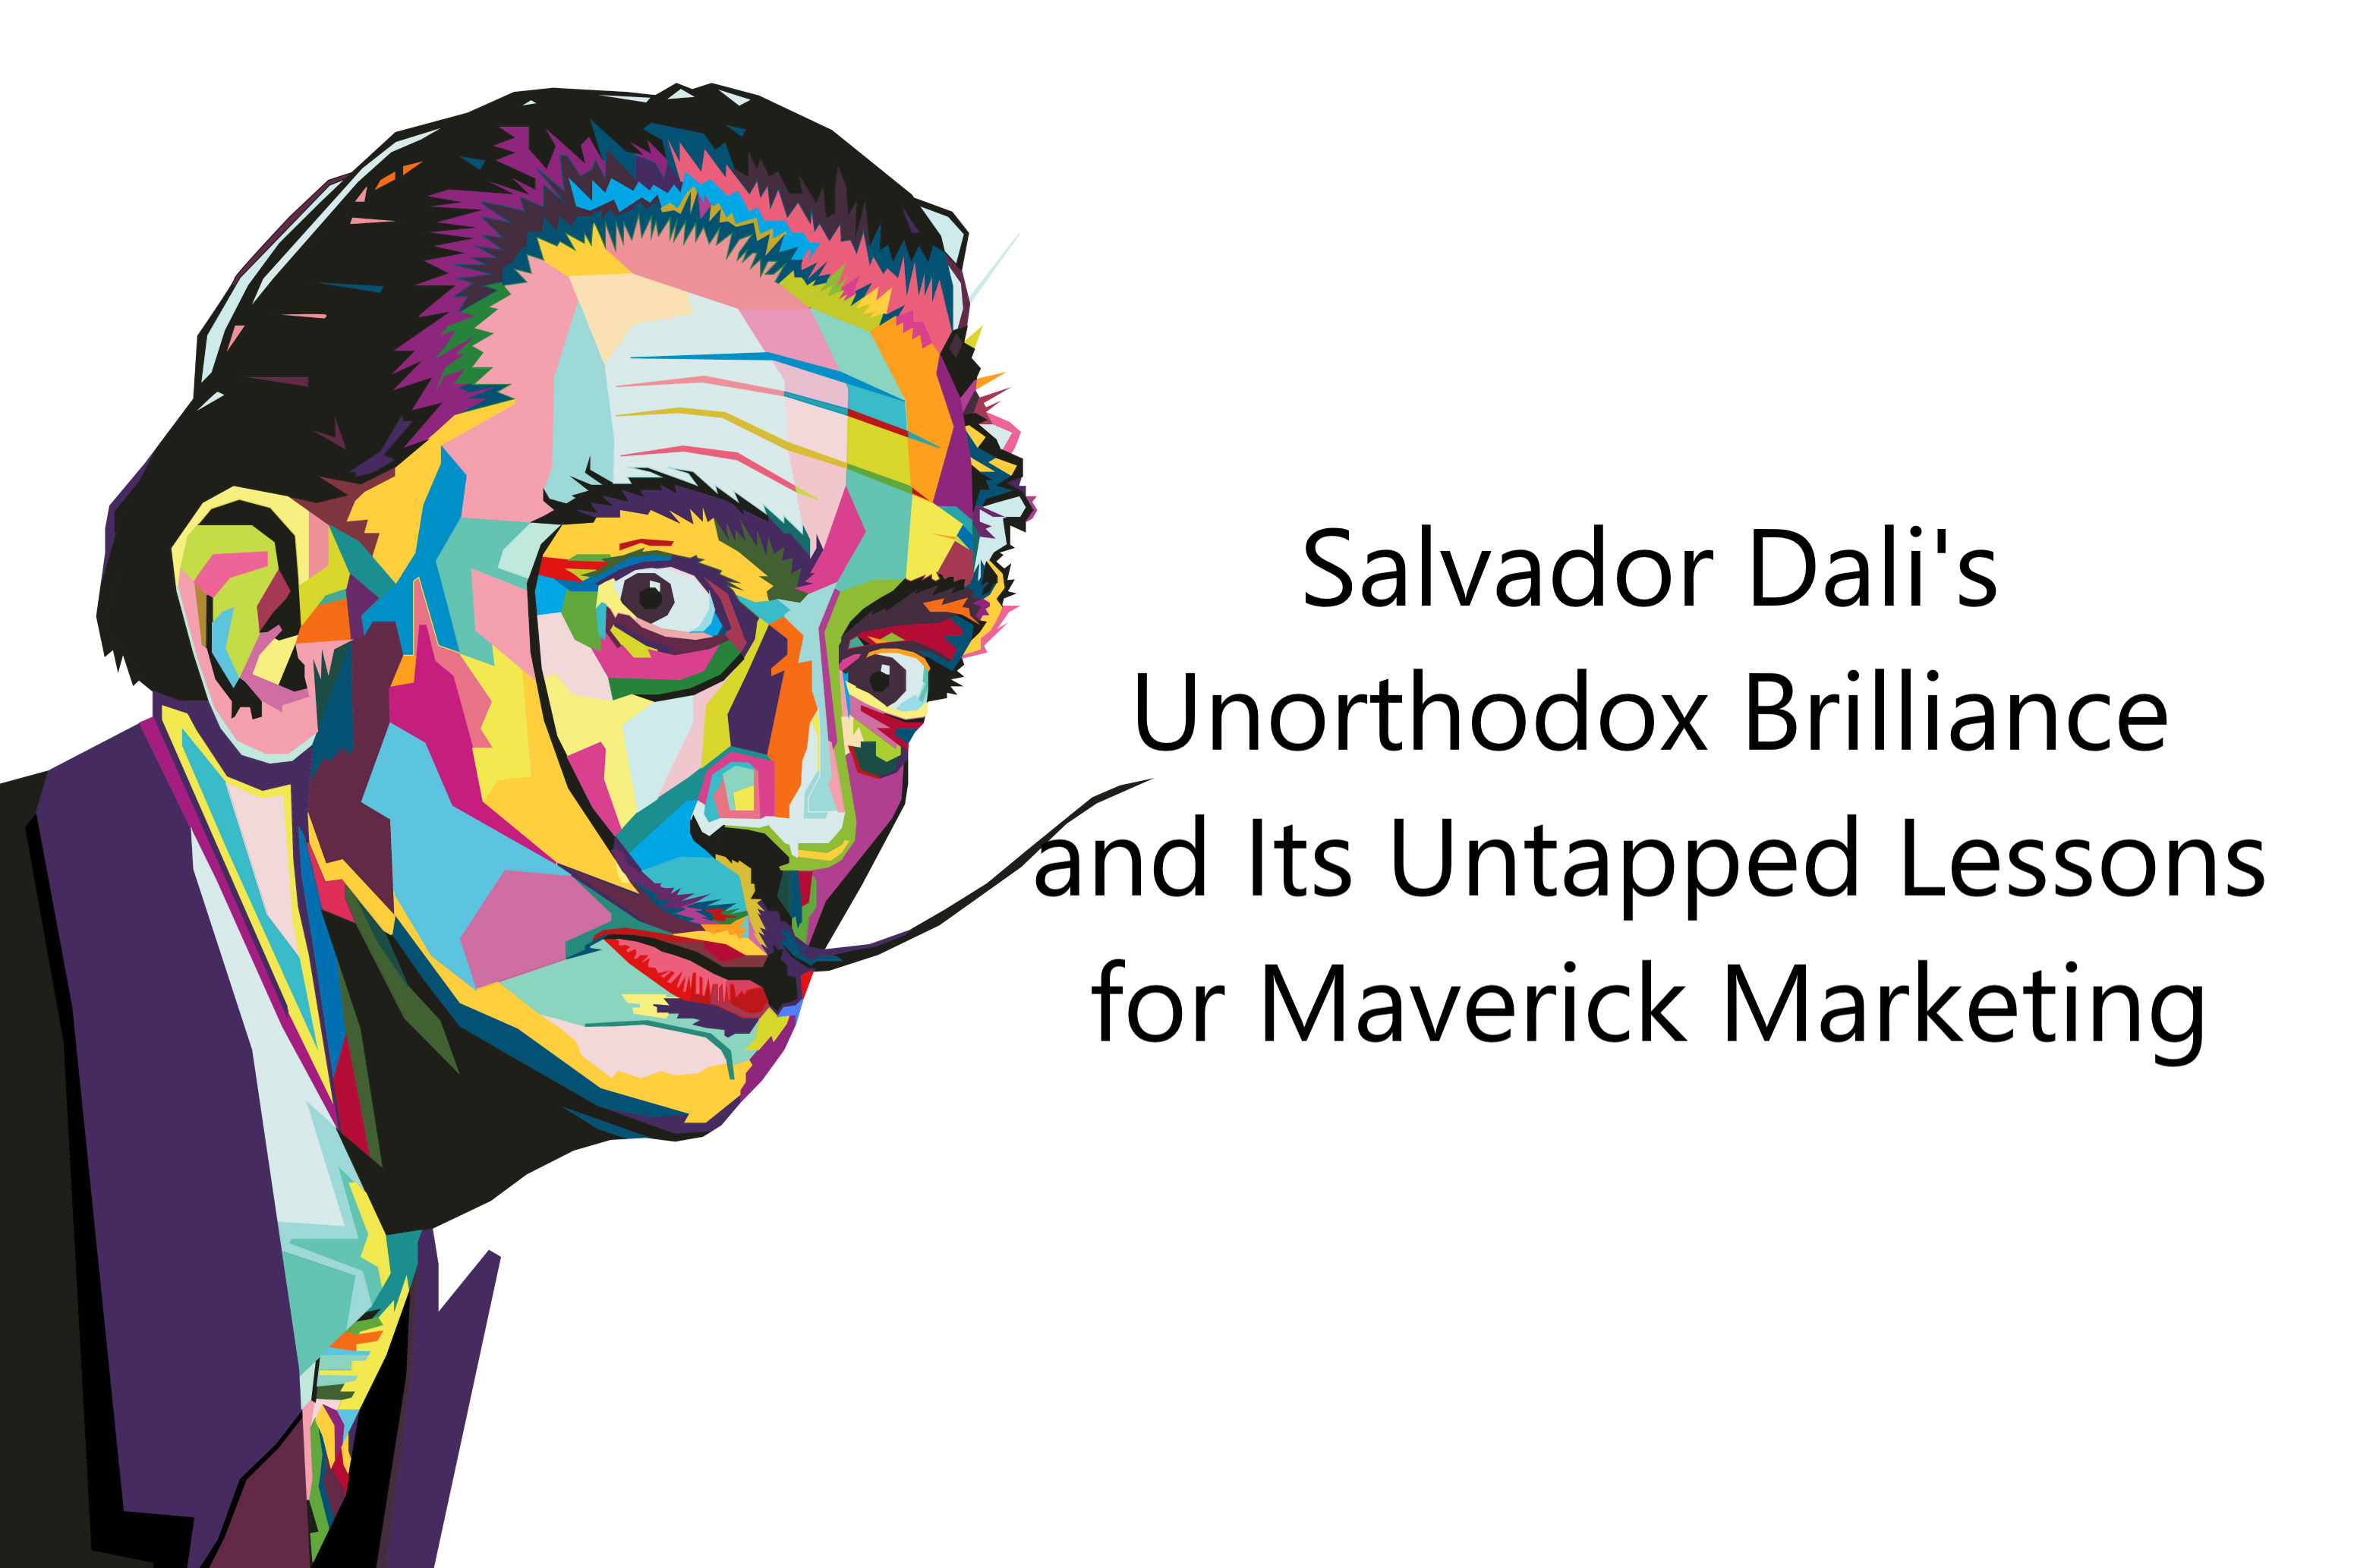 Salvador Dali's Unorthodox Brilliance and Its Untapped Lessons for Maverick Marketing